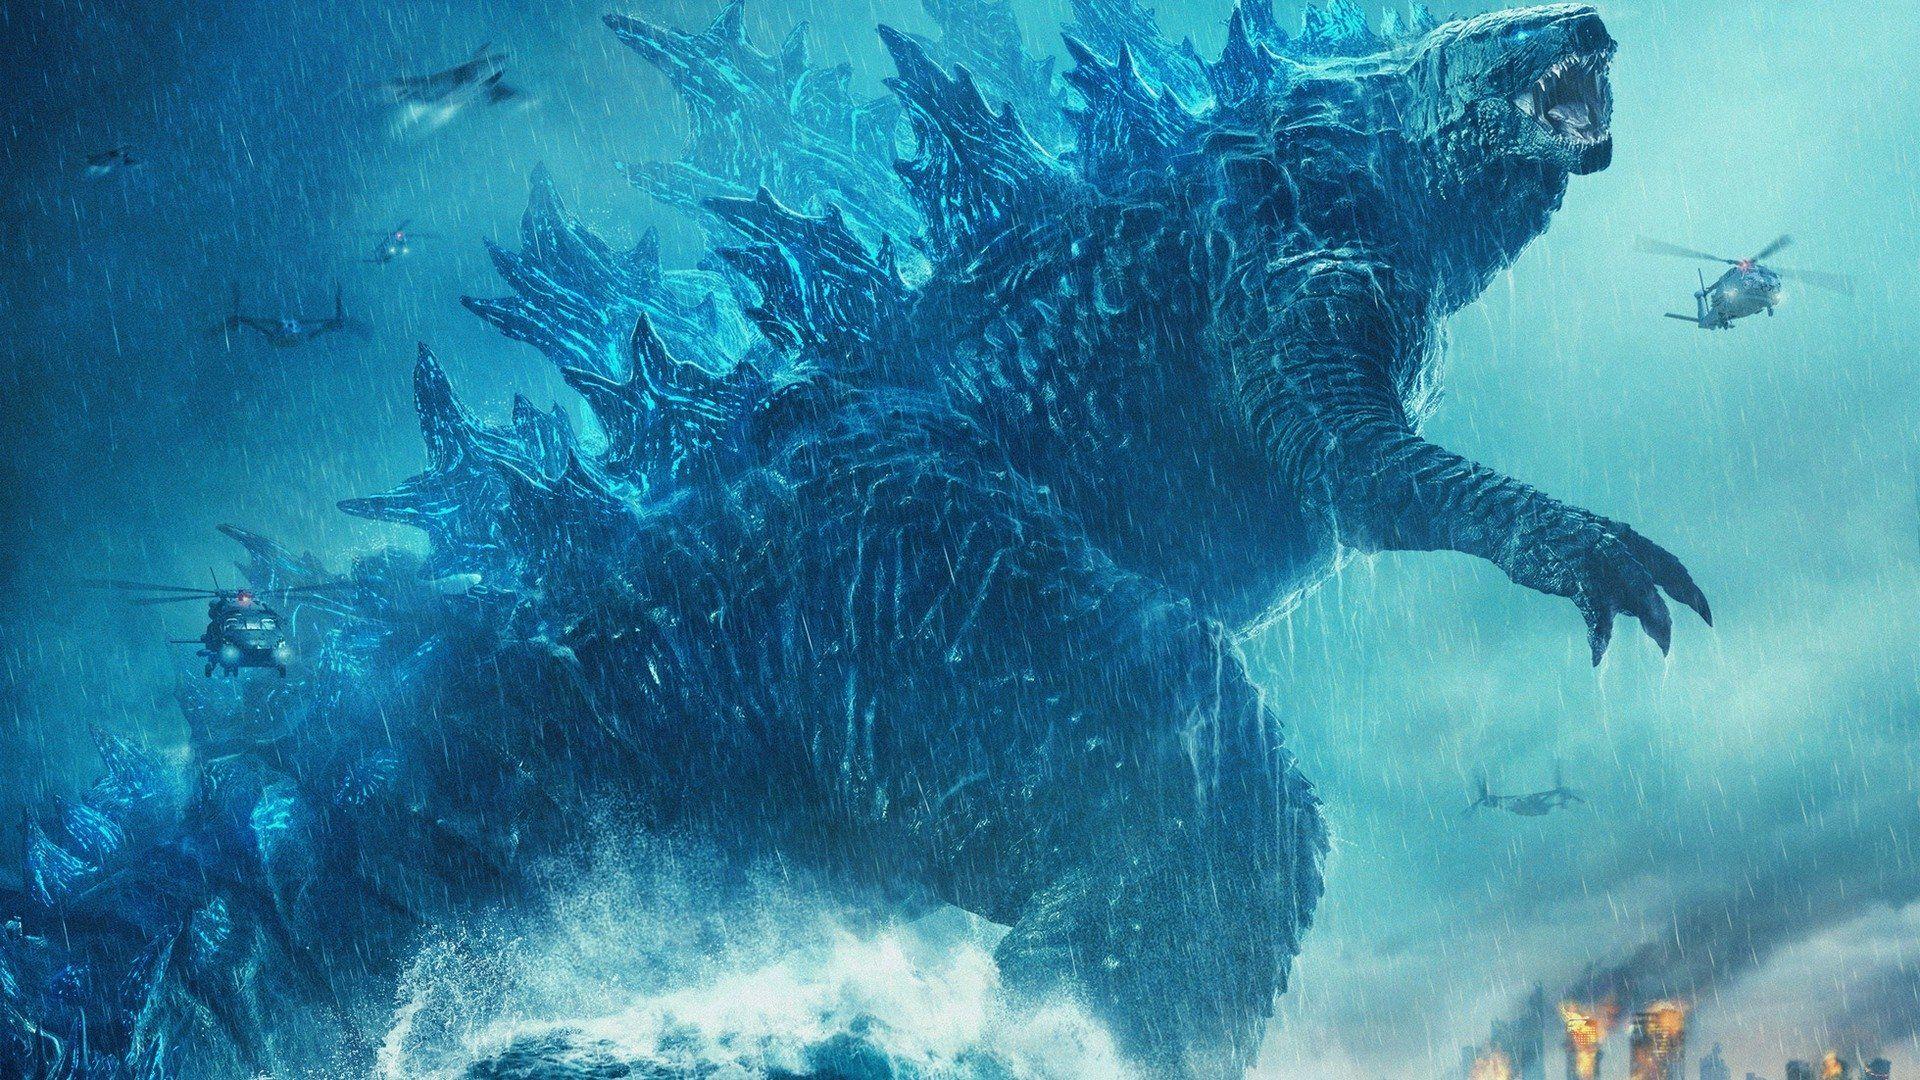 Free download Godzilla King of the Monsters 8K Wallpaper 27 7680x4320 for  your Desktop Mobile  Tablet  Explore 24 3840 X 2160 Godzilla Wallpapers   2160 X 1440 Wallpaper Alienware Wallpaper 3840 x 2160 3840 x 2160 4K  Wallpaper